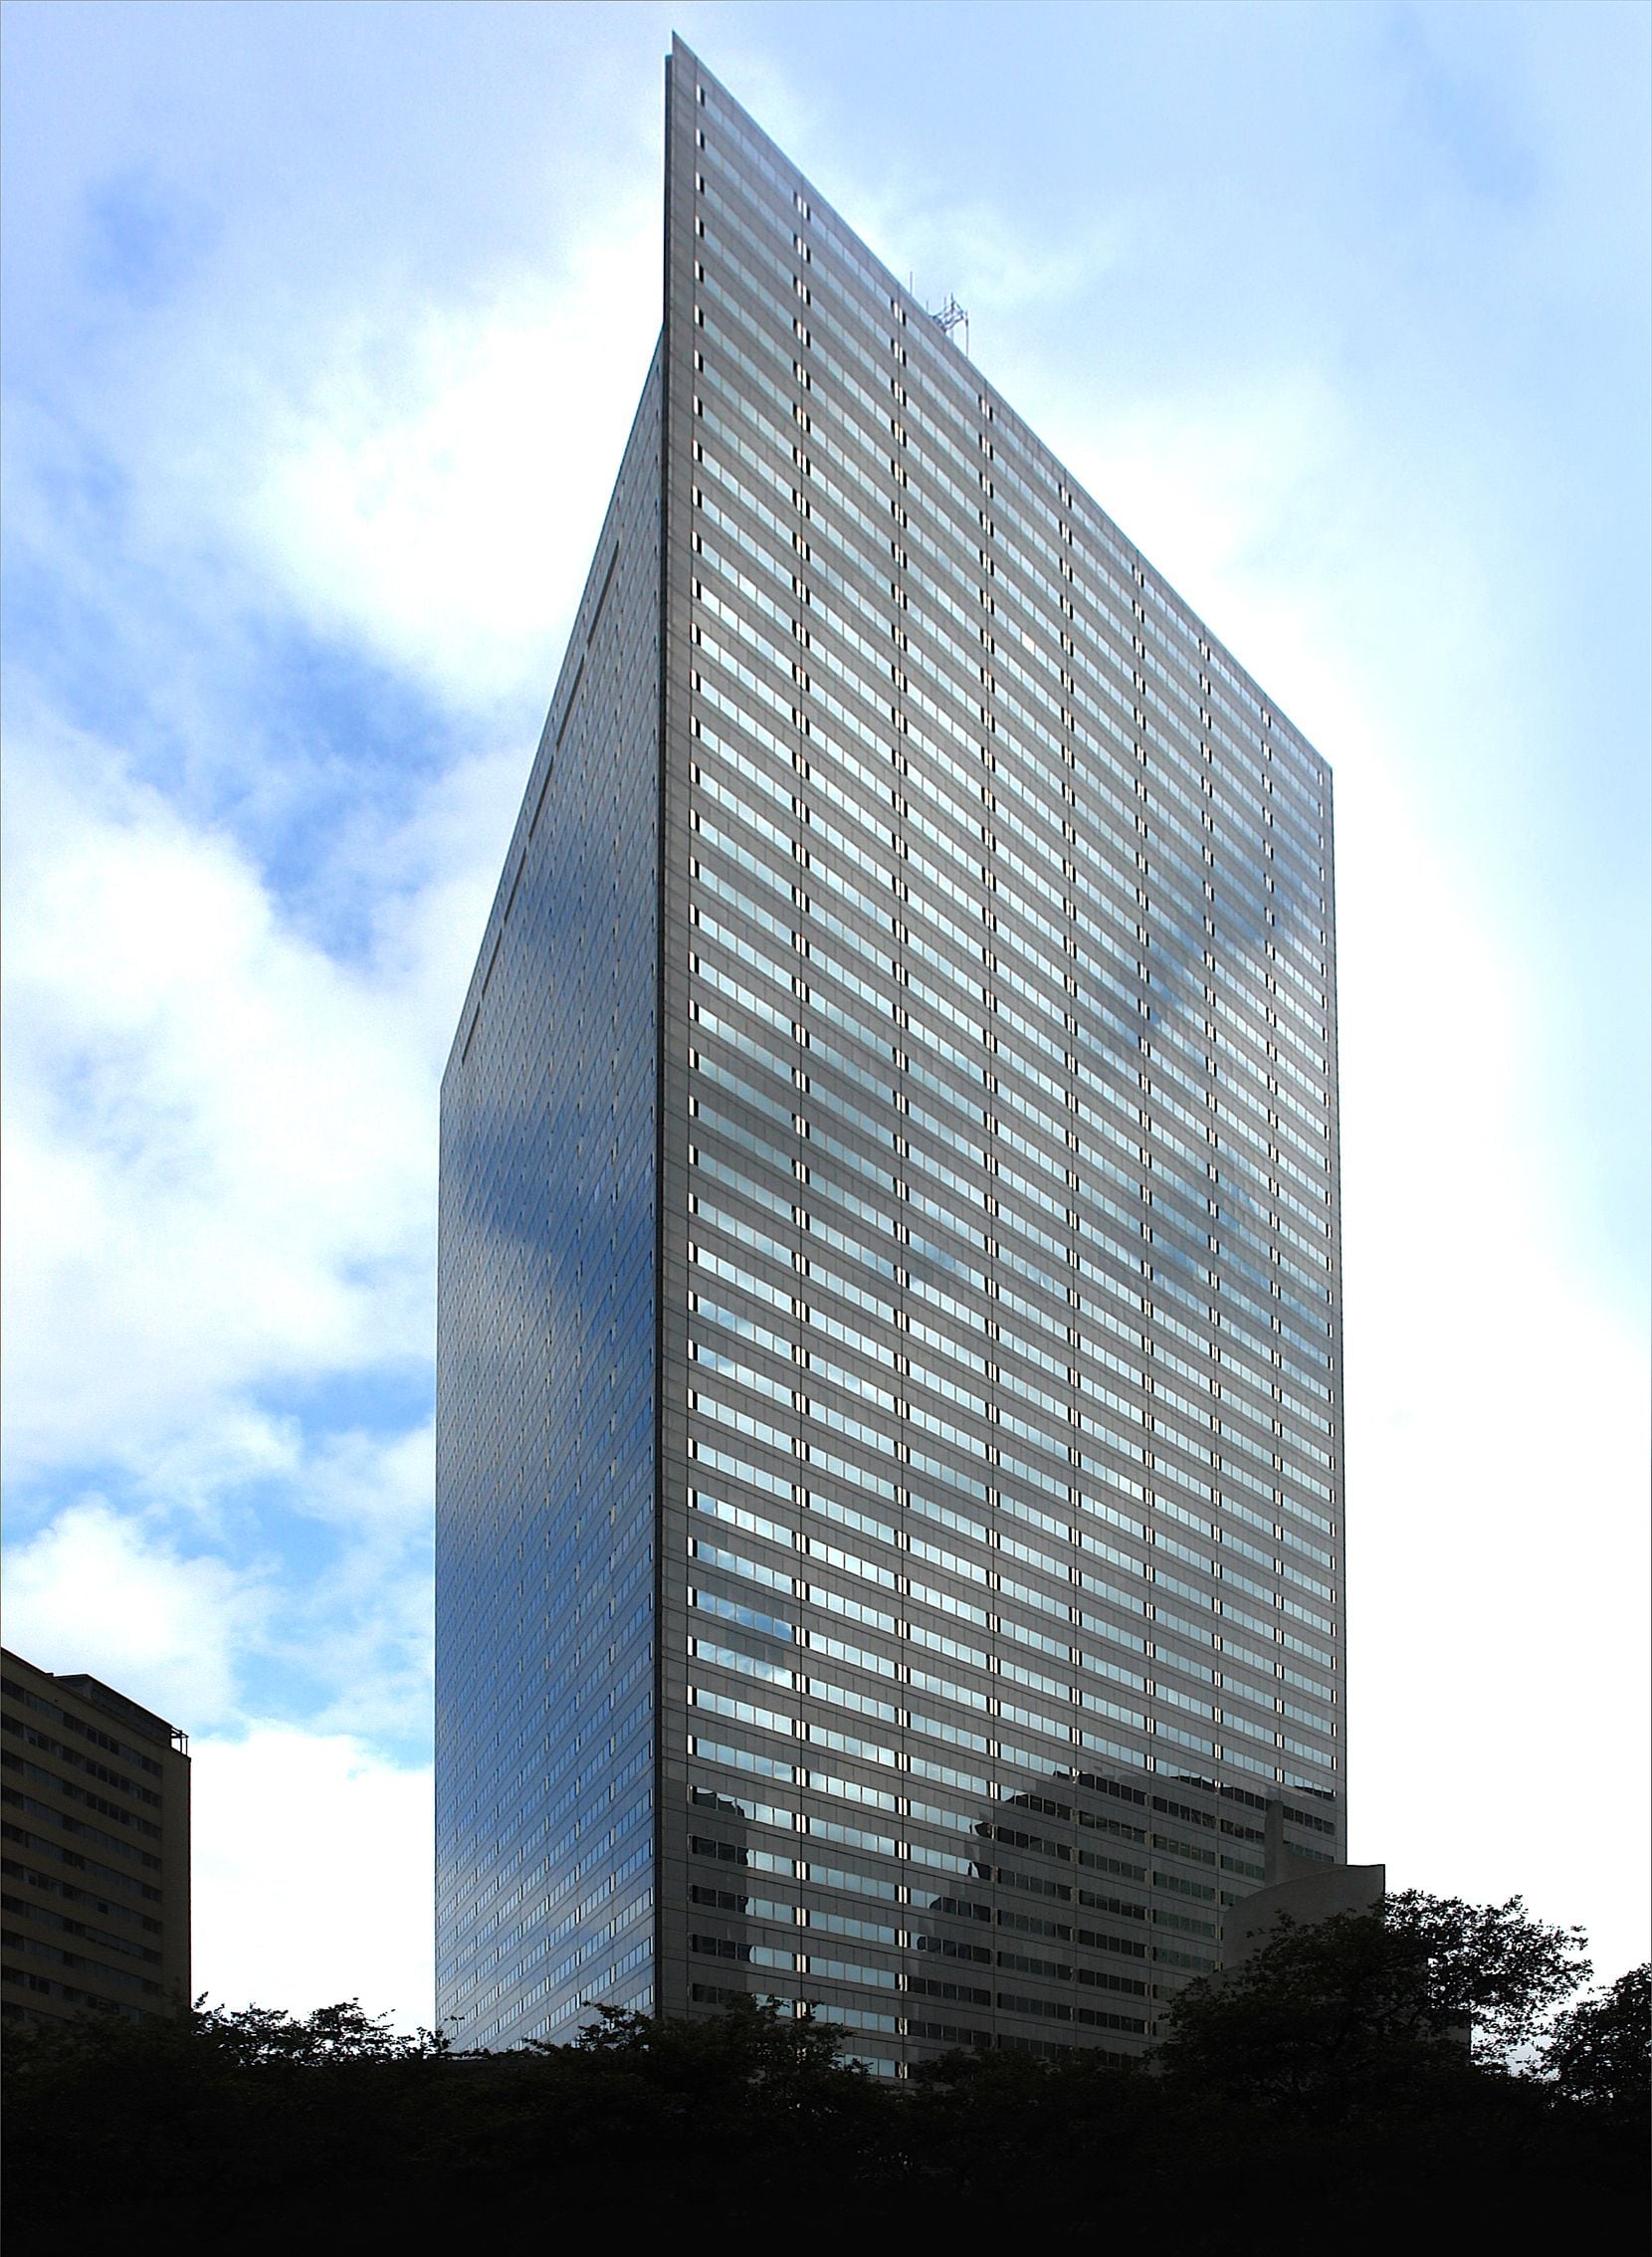 The Energy Plaza tower on Bryan Street was designed by architect I.M. Pei and Partners.